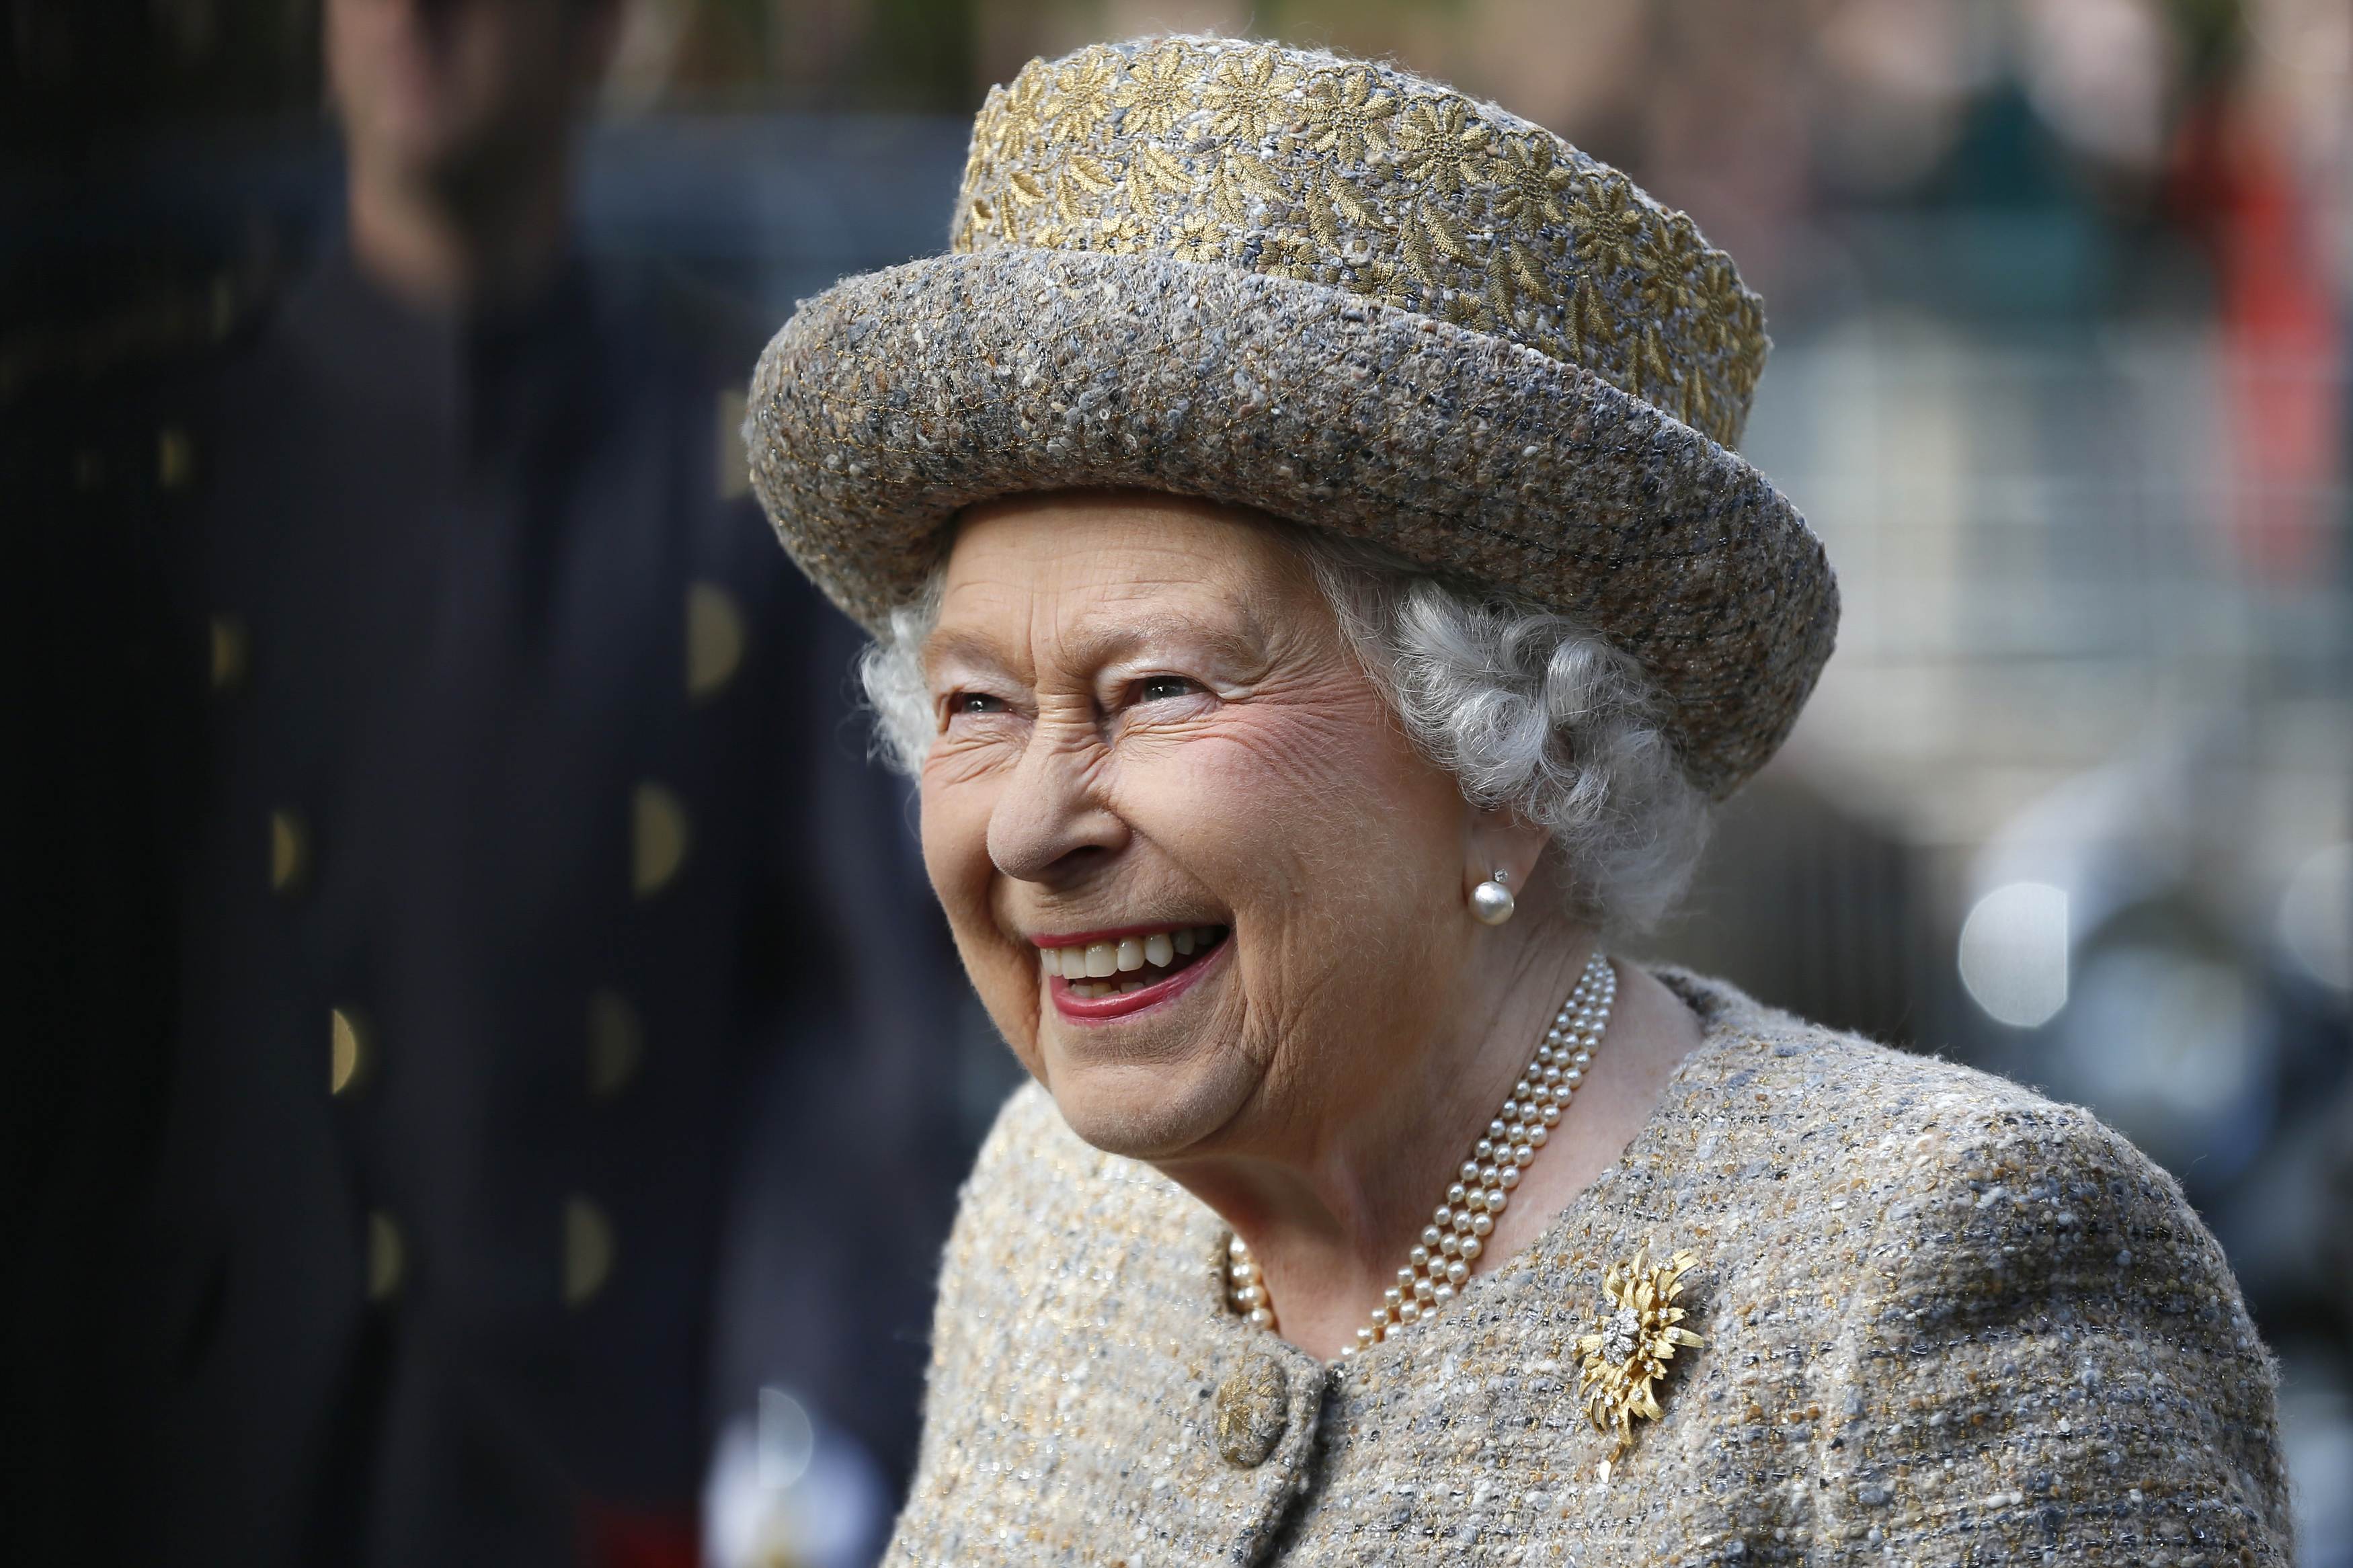 Queen Elizabeth II smiles as she arrives before the Opening of the Flanders' Fields Memorial Garden at Wellington Barracks on November 6, 2014 in London, England | Photo: Getty Images